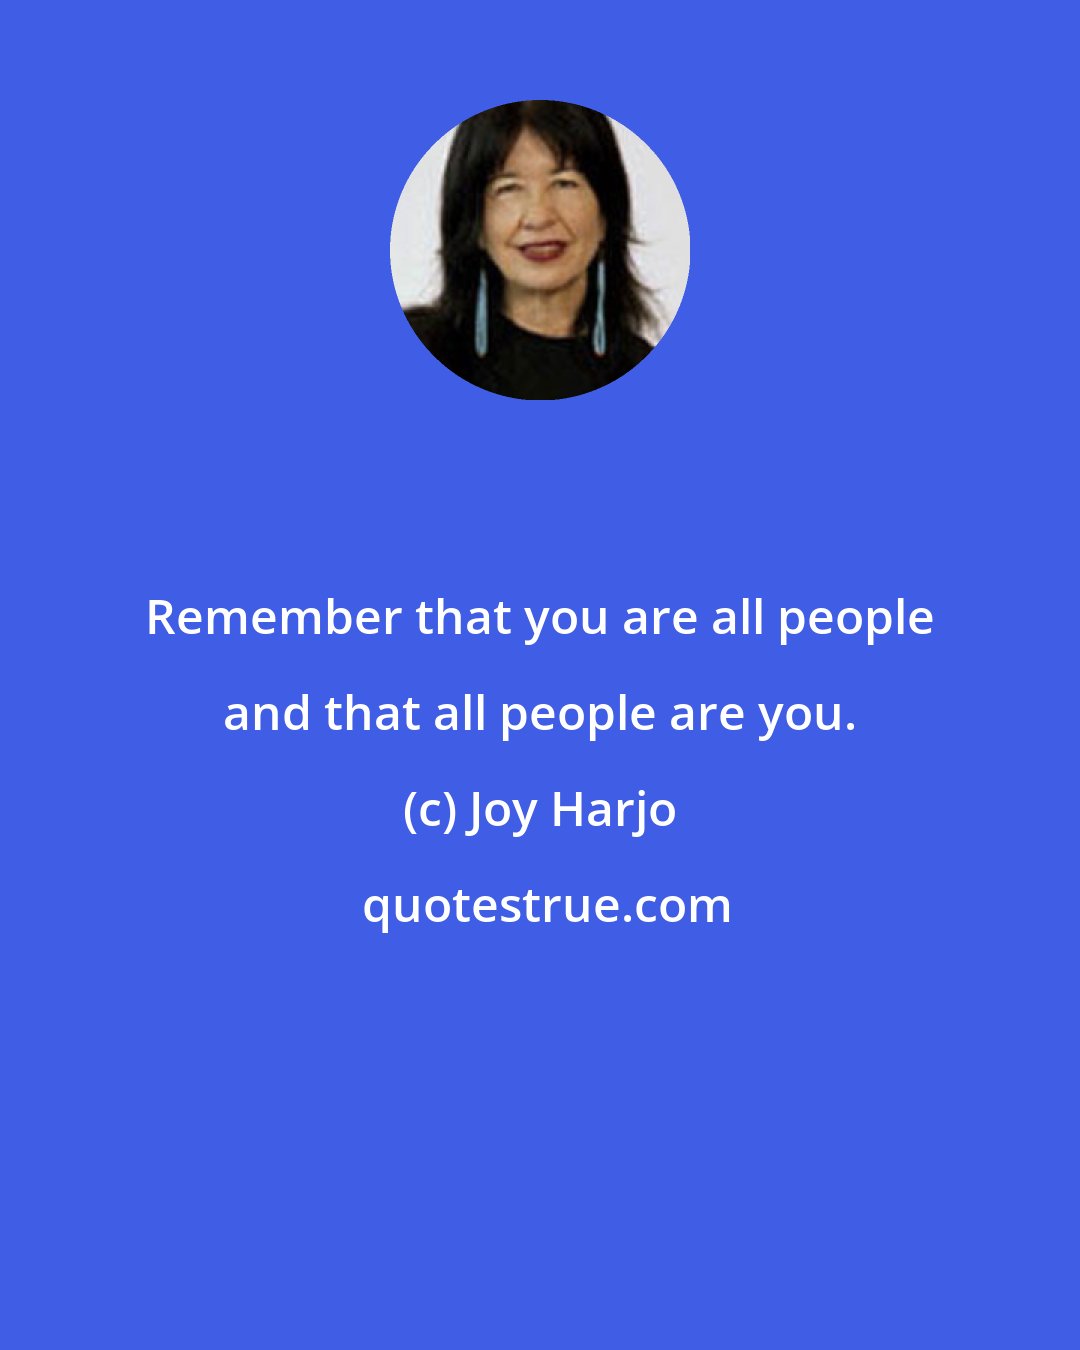 Joy Harjo: Remember that you are all people and that all people are you.